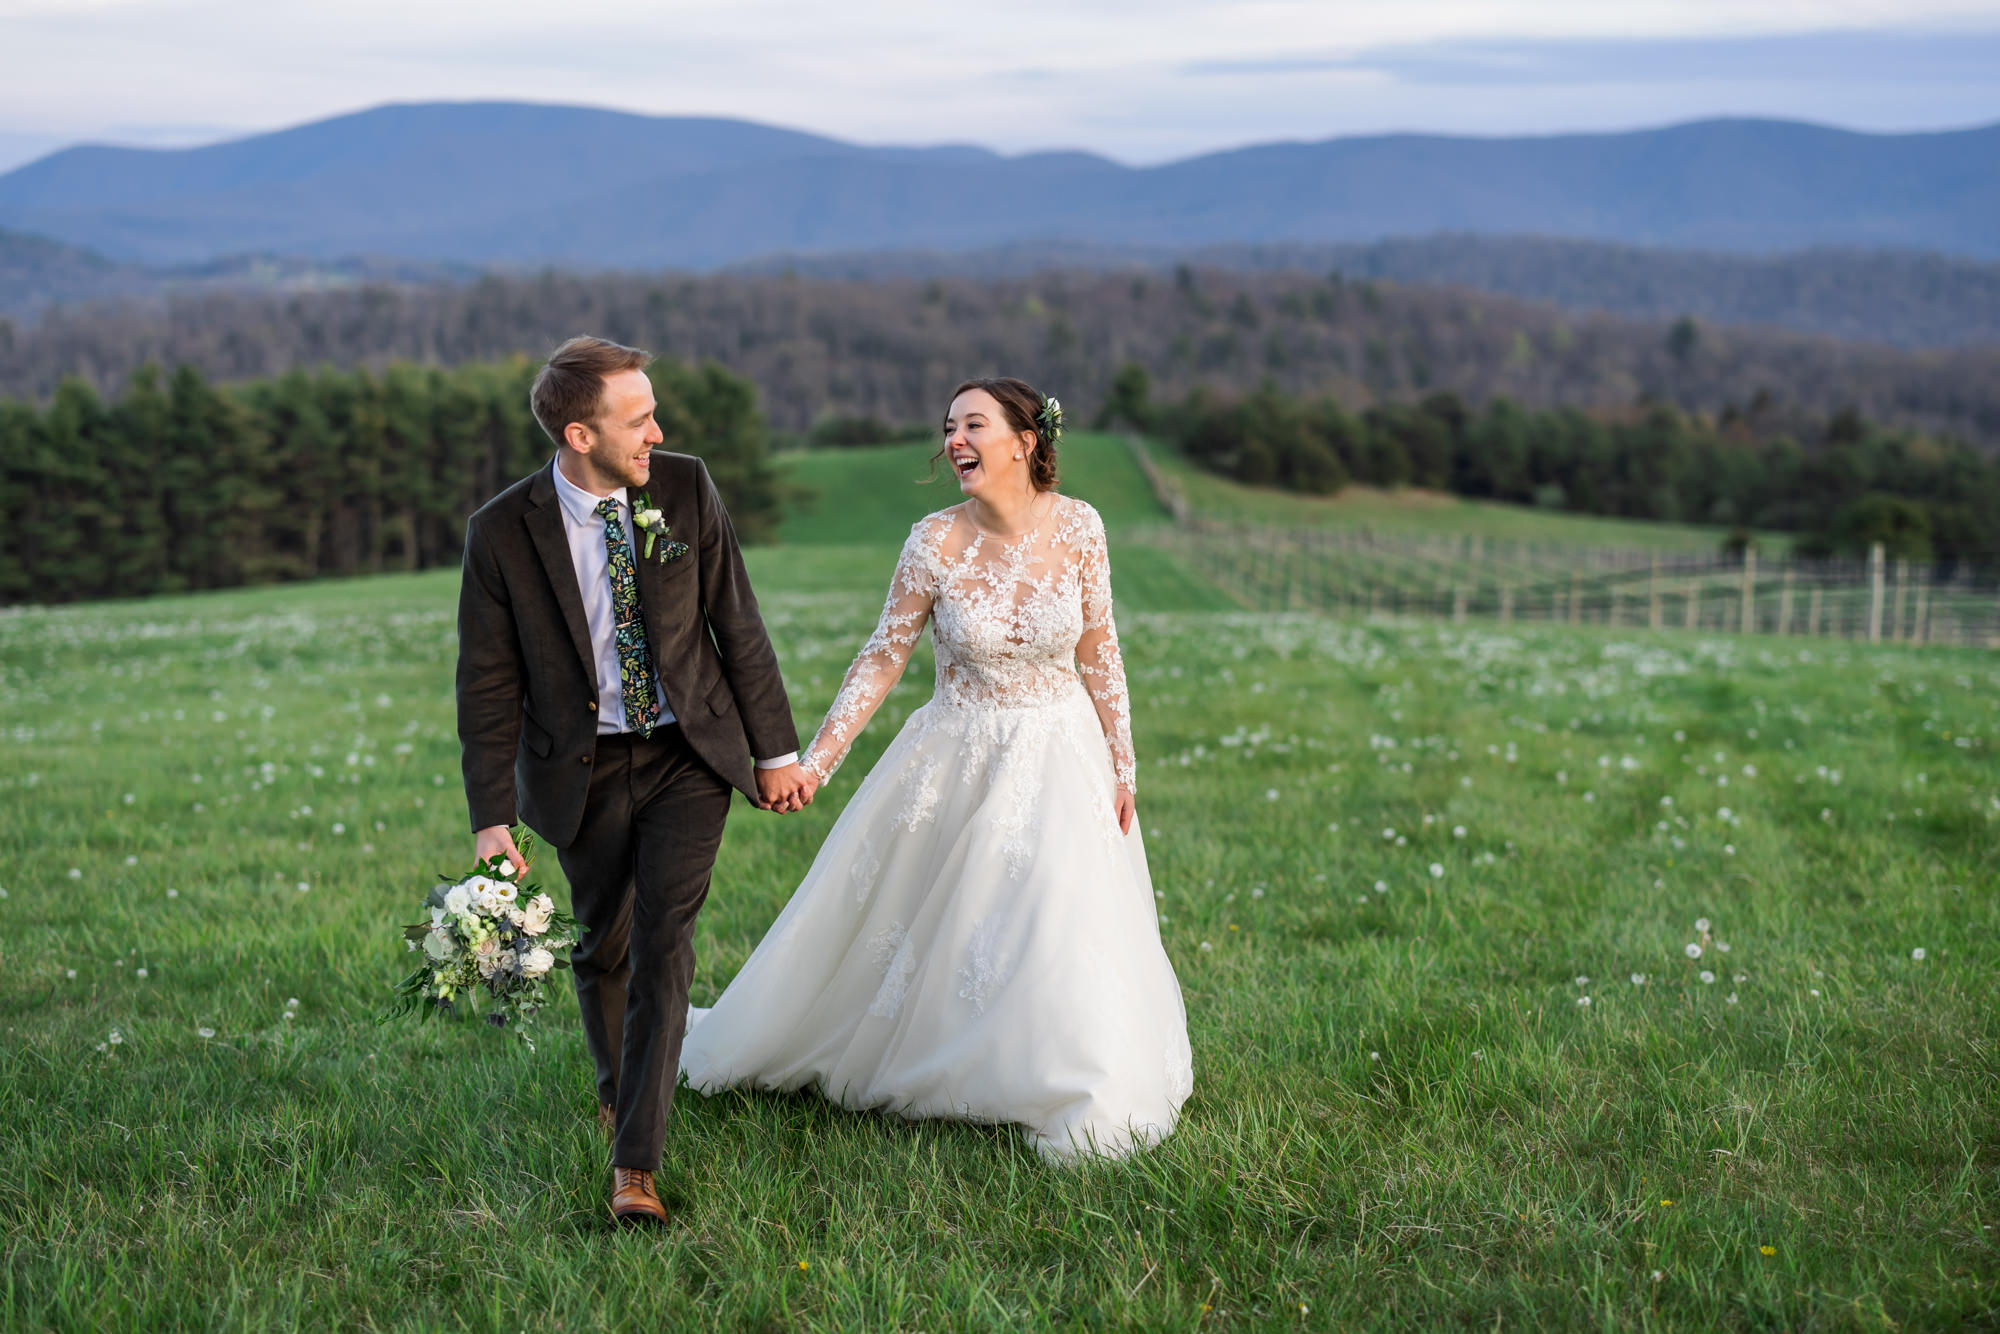 bride and groom holding hands and walking through grassy field during outdoor wedding portraits